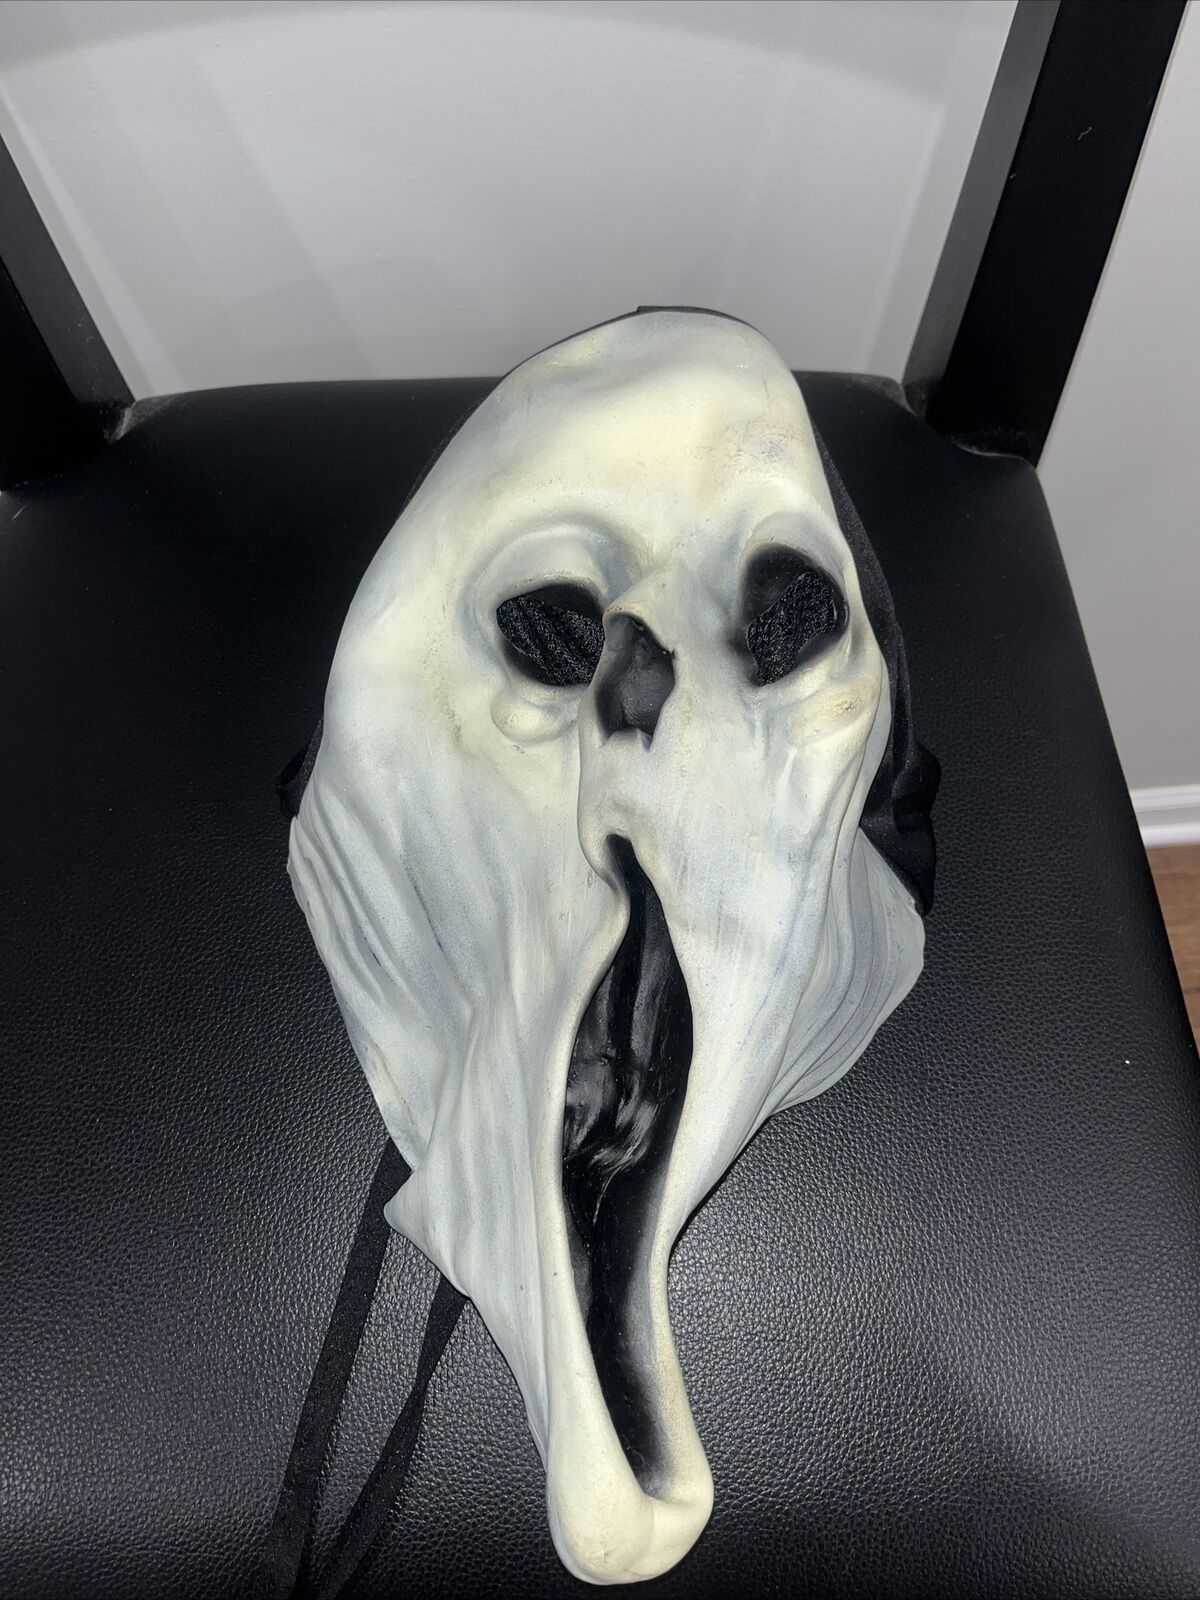 1995 2003 The Paper Magic Group Vinyl Scream Ghost Face Ghoul Halloween Mask